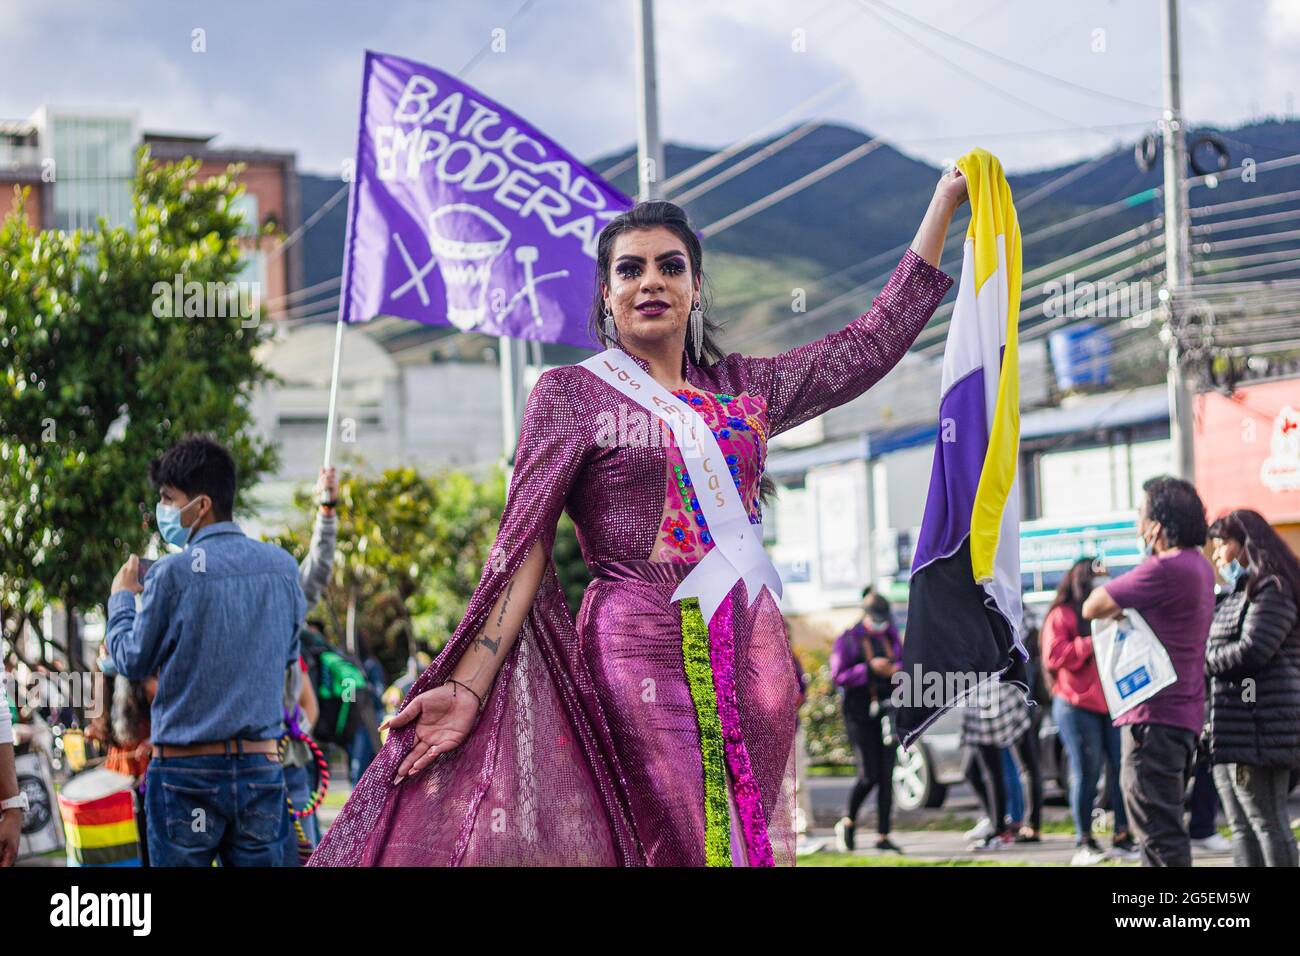 A trans women poses for a photo while wearing a beauty queen dress and ribbon that reads 'The Americas' during the annual celebreation of the Pride Parade in demand of LGTBQ rights in Colombia in Pasto, Narino - Colombia on June 25, 2021. Stock Photo